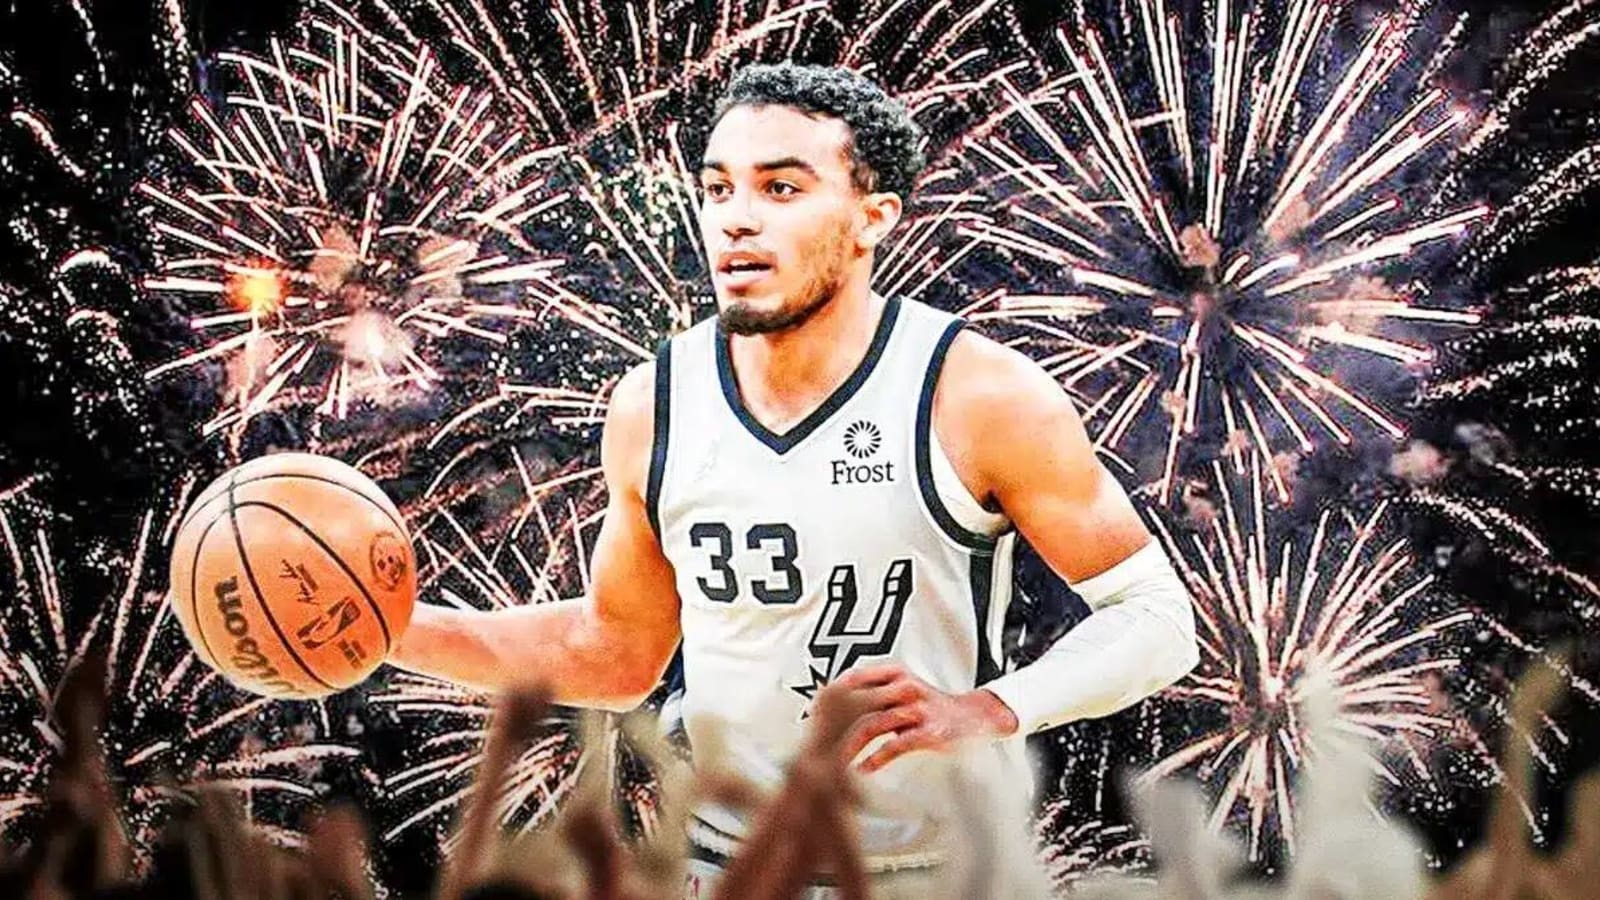 Spurs’ Tre Jones drops truth bomb on promotion to starting PG